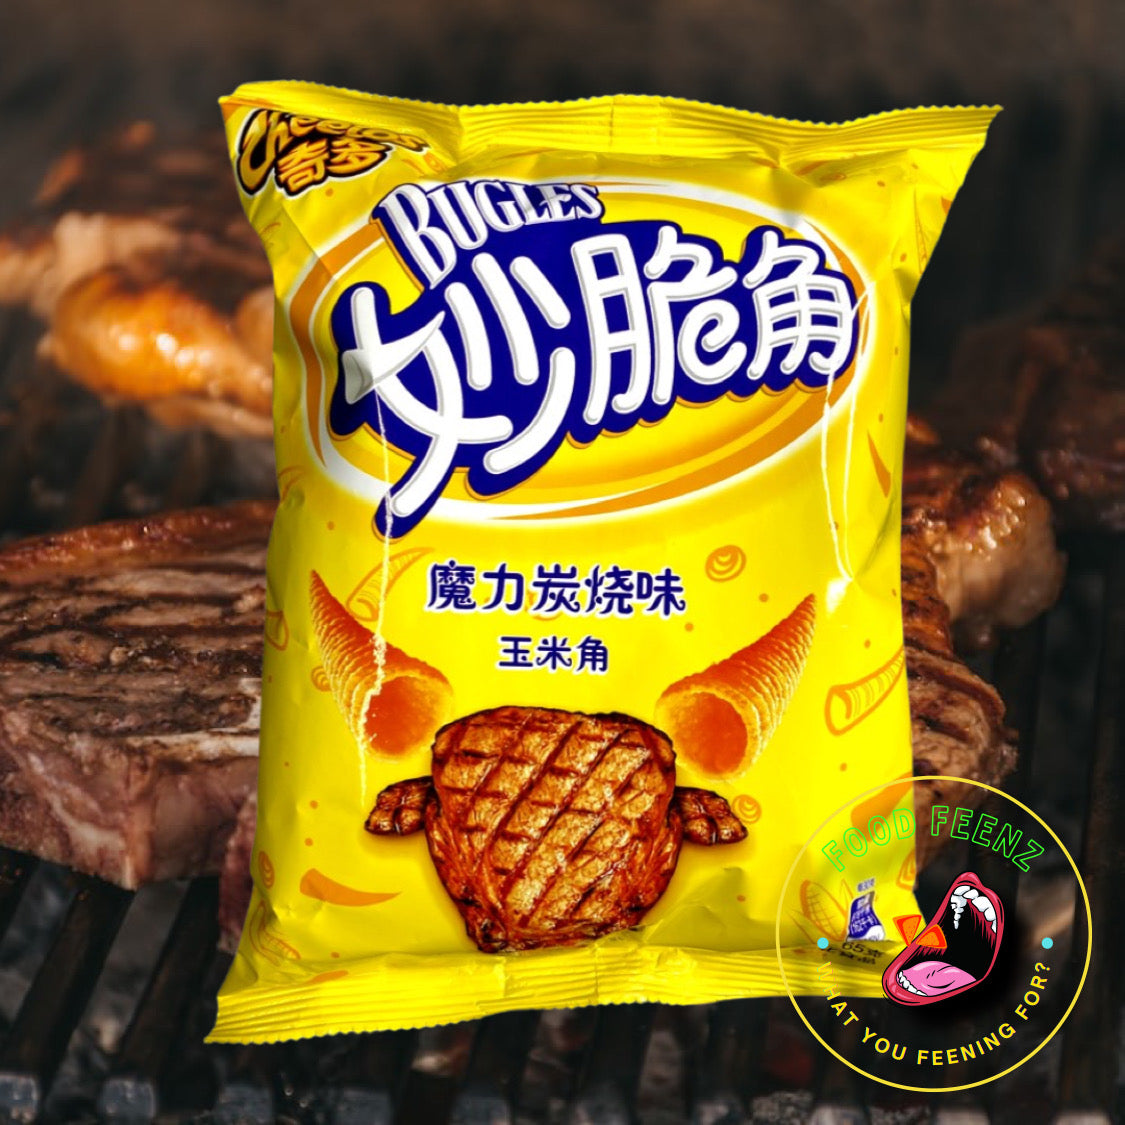 Cheetos Bugles Charcoal Barbecue Flavor (China)